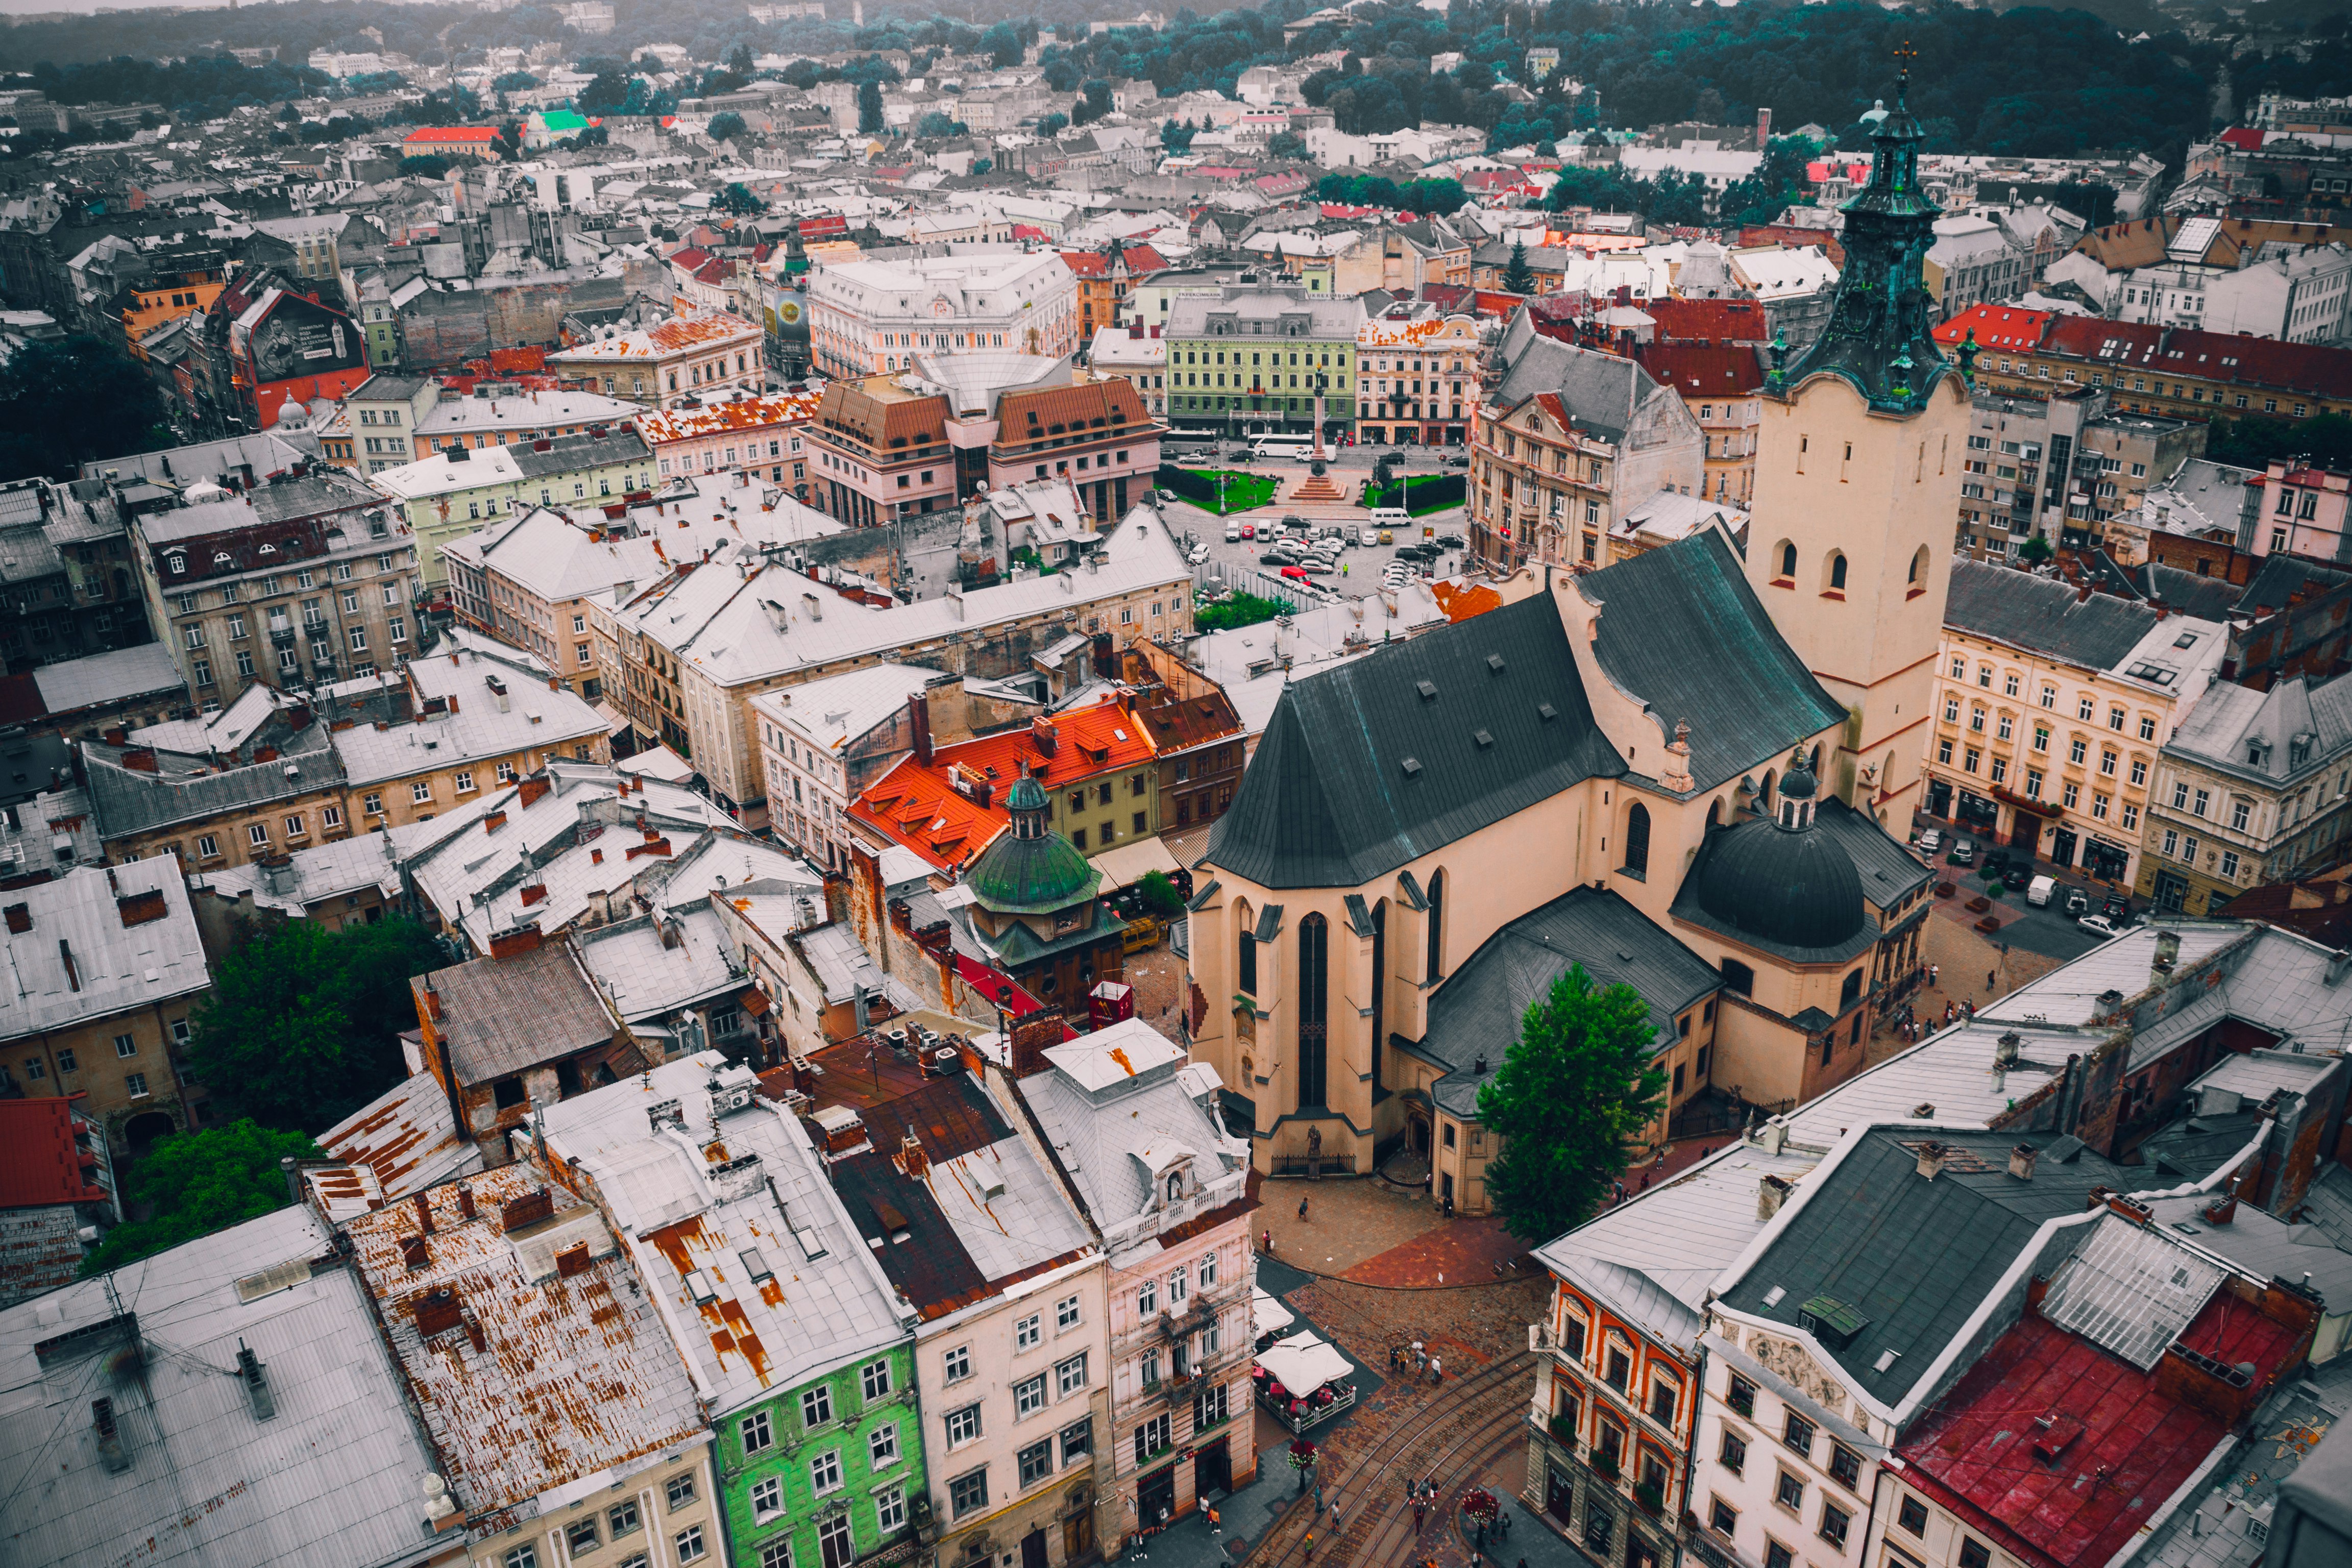 The image shows the city of Lviv (top view)